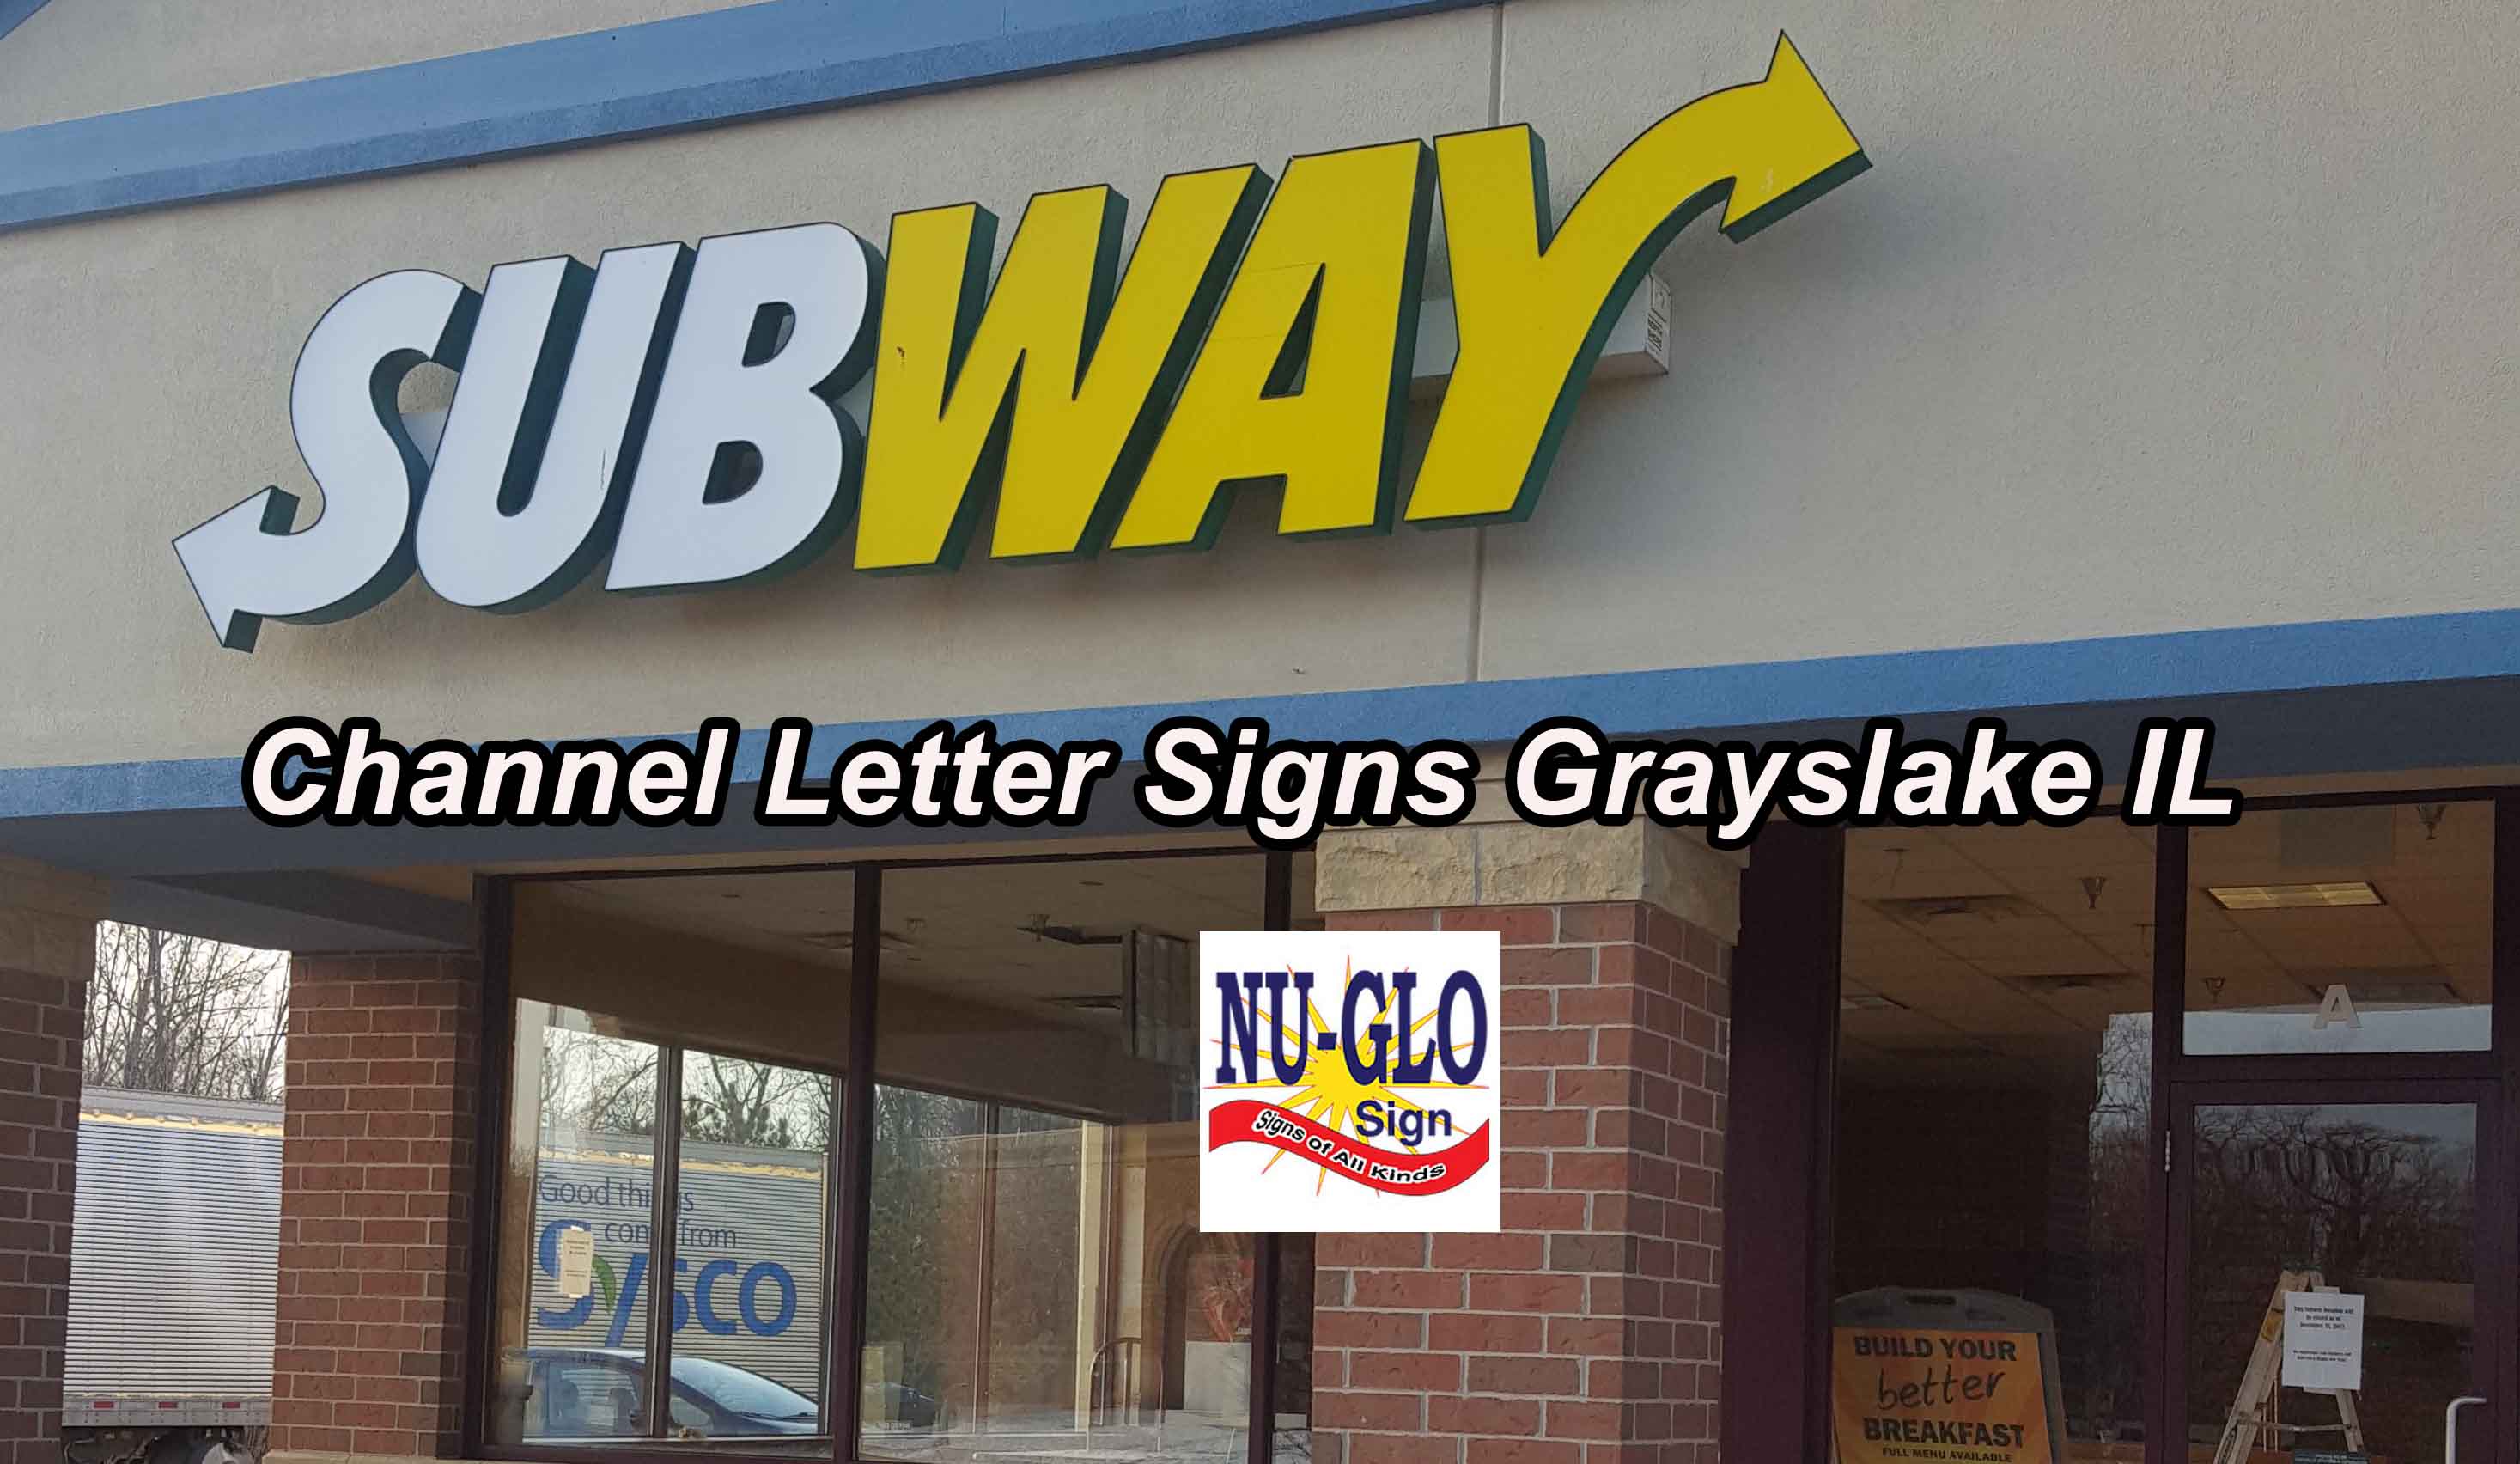 Channel Letter Signs Grayslake IL